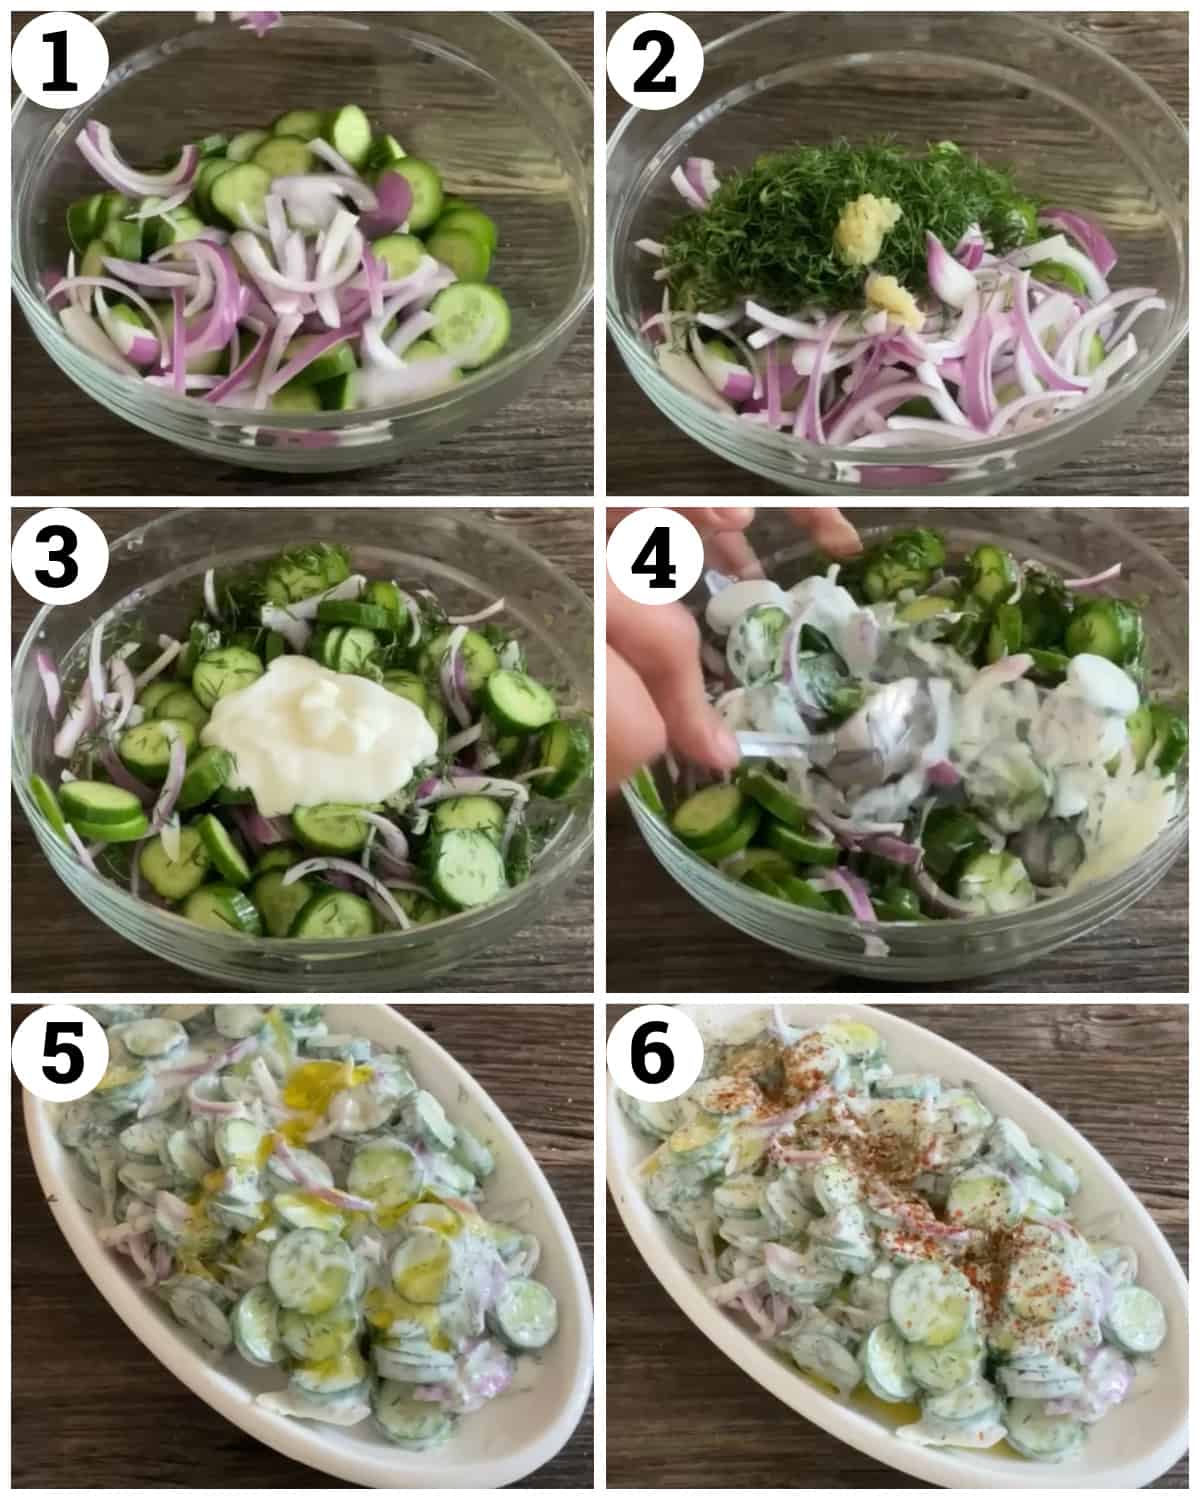 Mix the cucumber and red onion with the dill, vinegar, salt and pepper as well as yogurt. Top with olive oil and spices. 